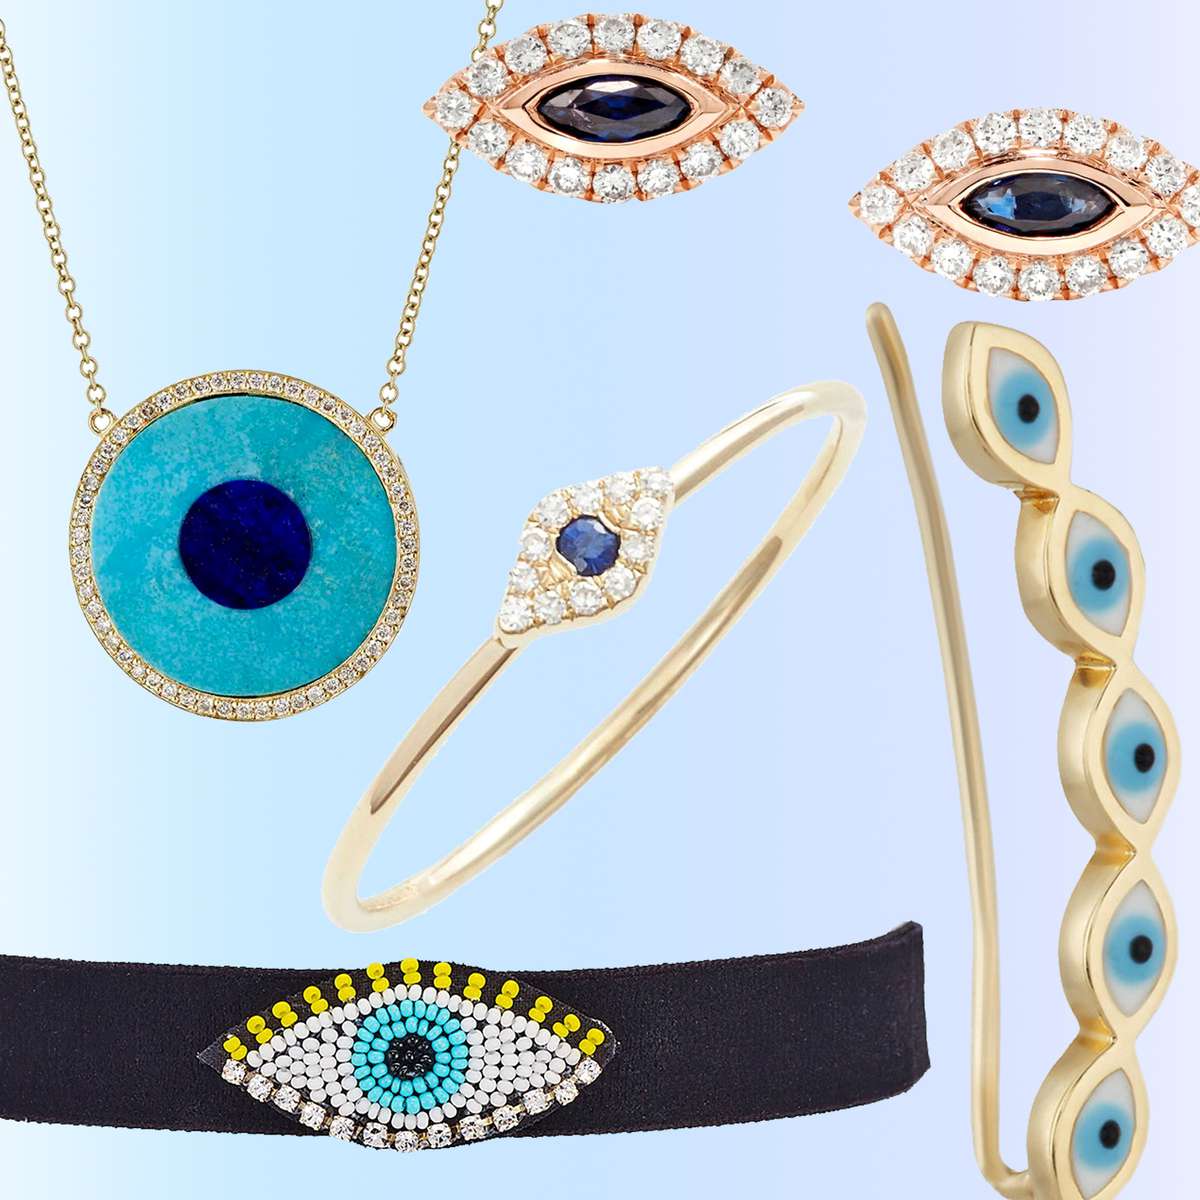 Image result for evil eye jewelry